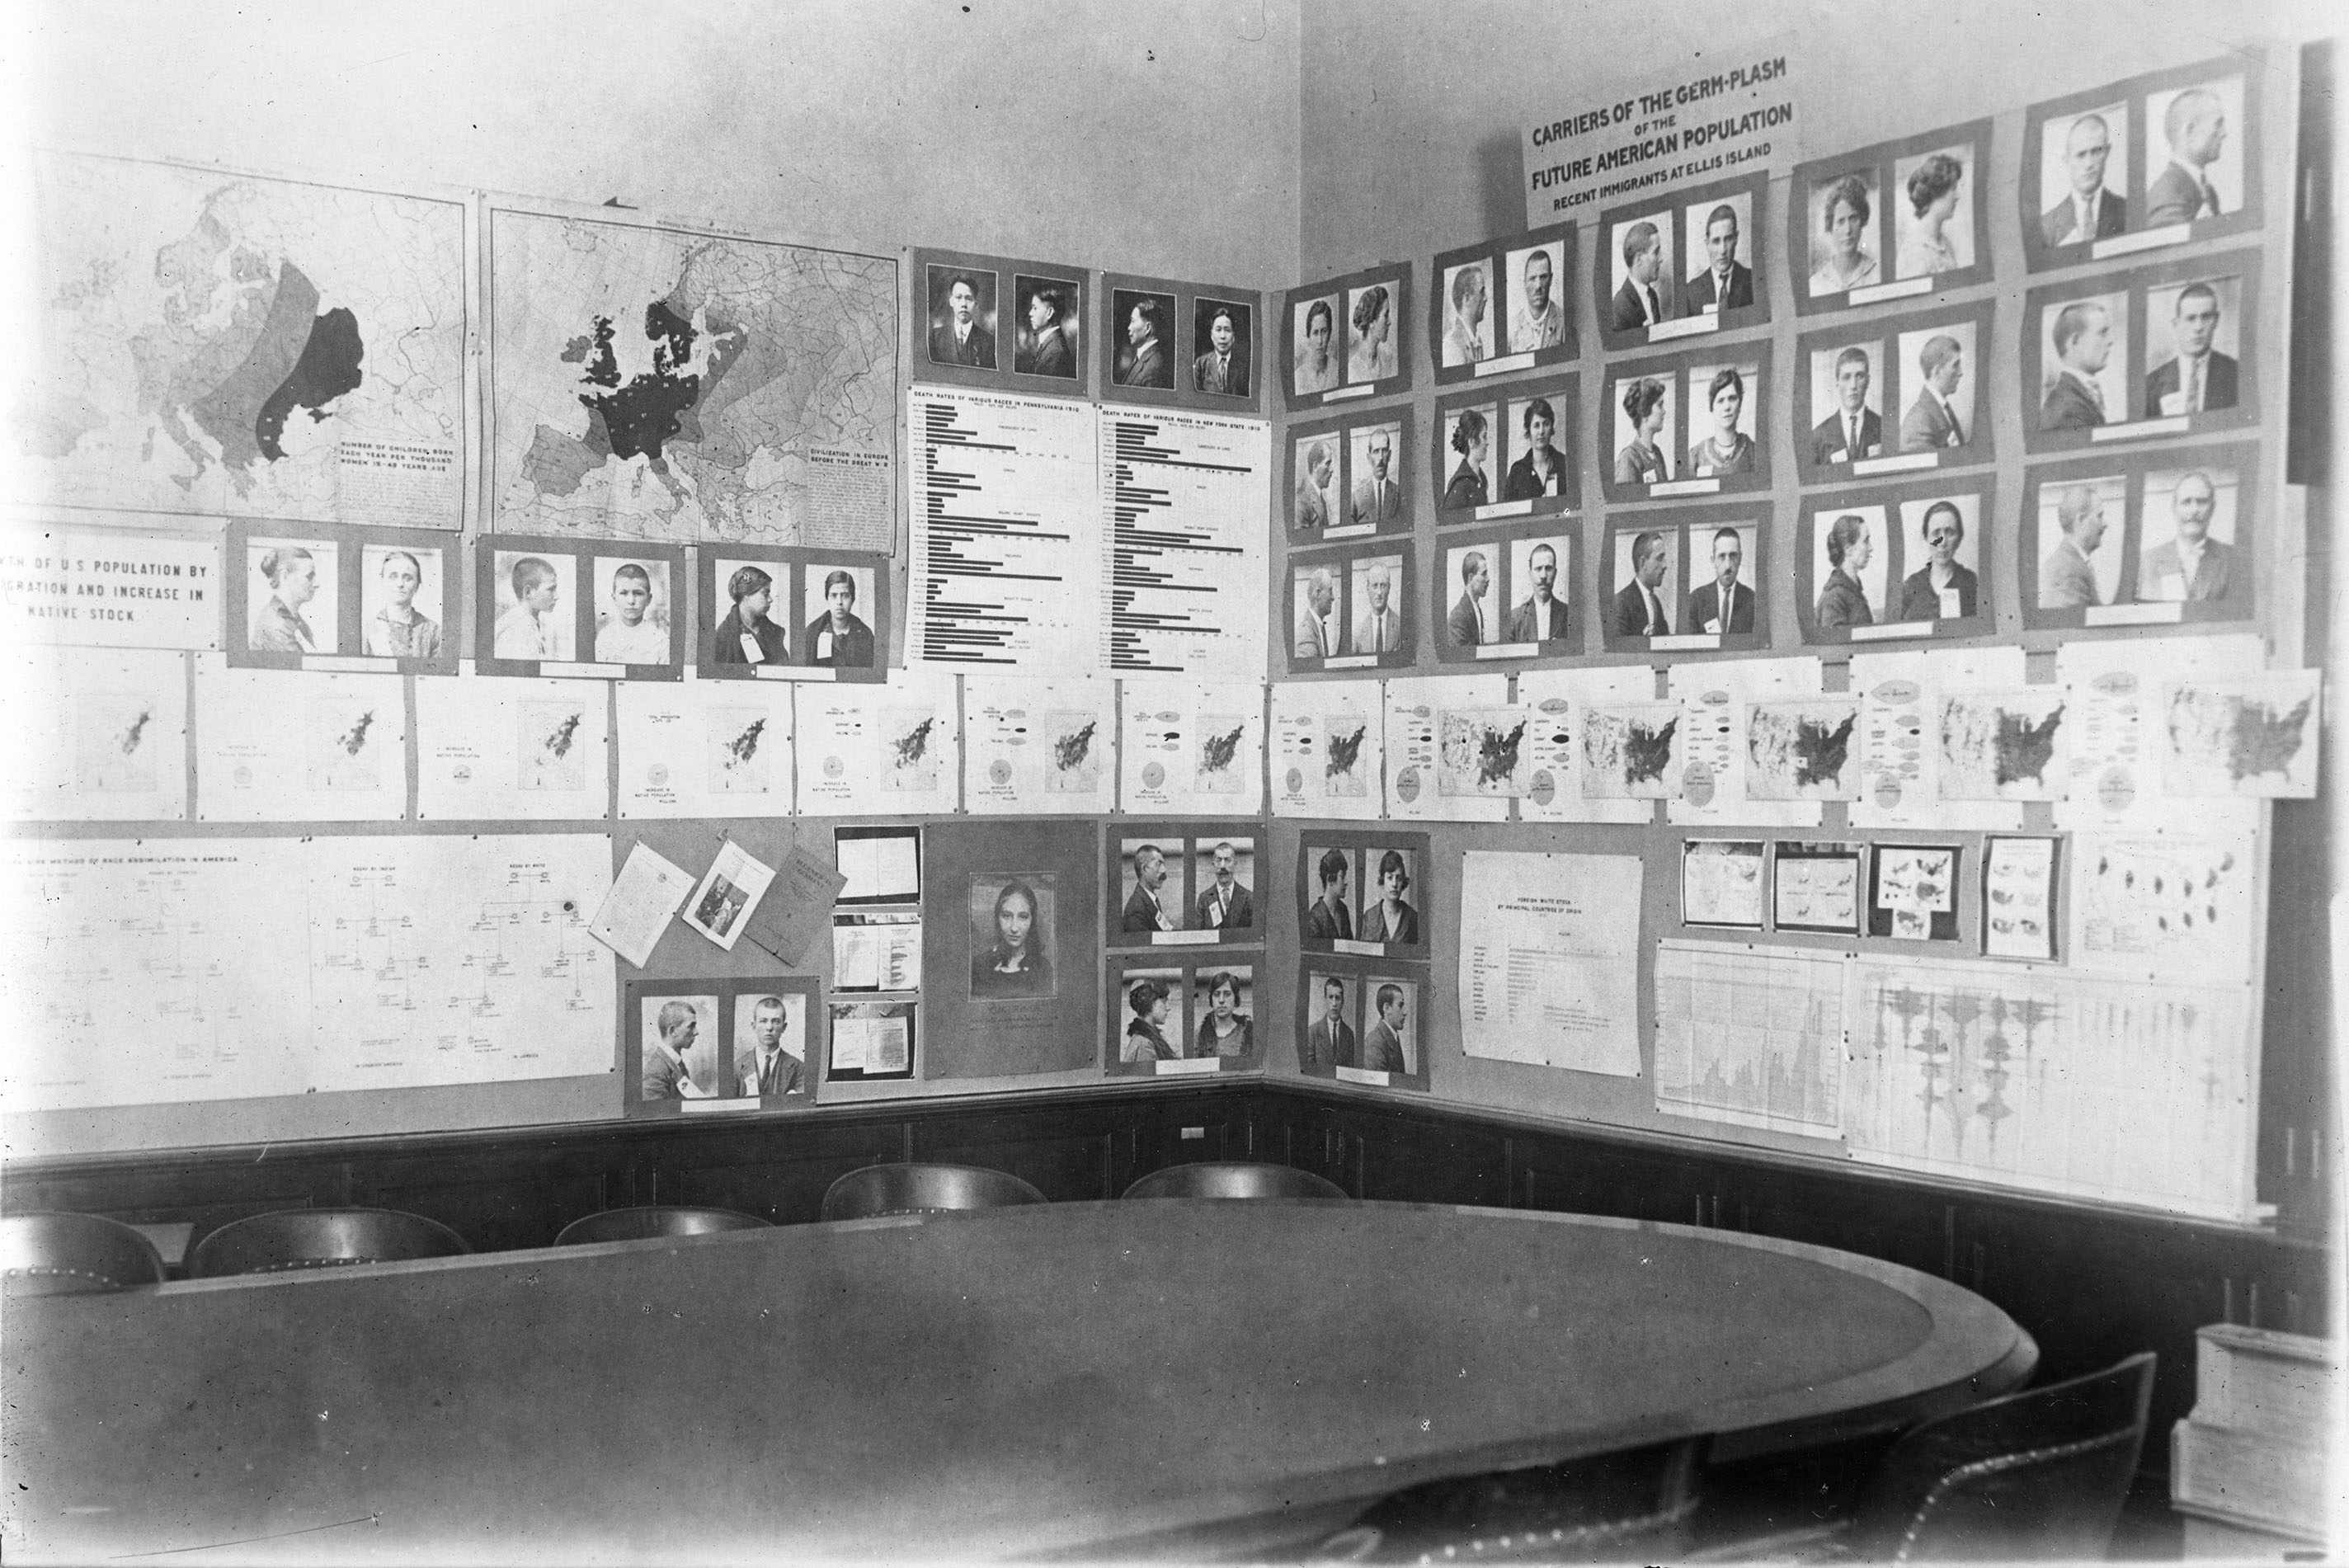 File:Rogues Gallery circa 1900.jpg - Wikimedia Commons